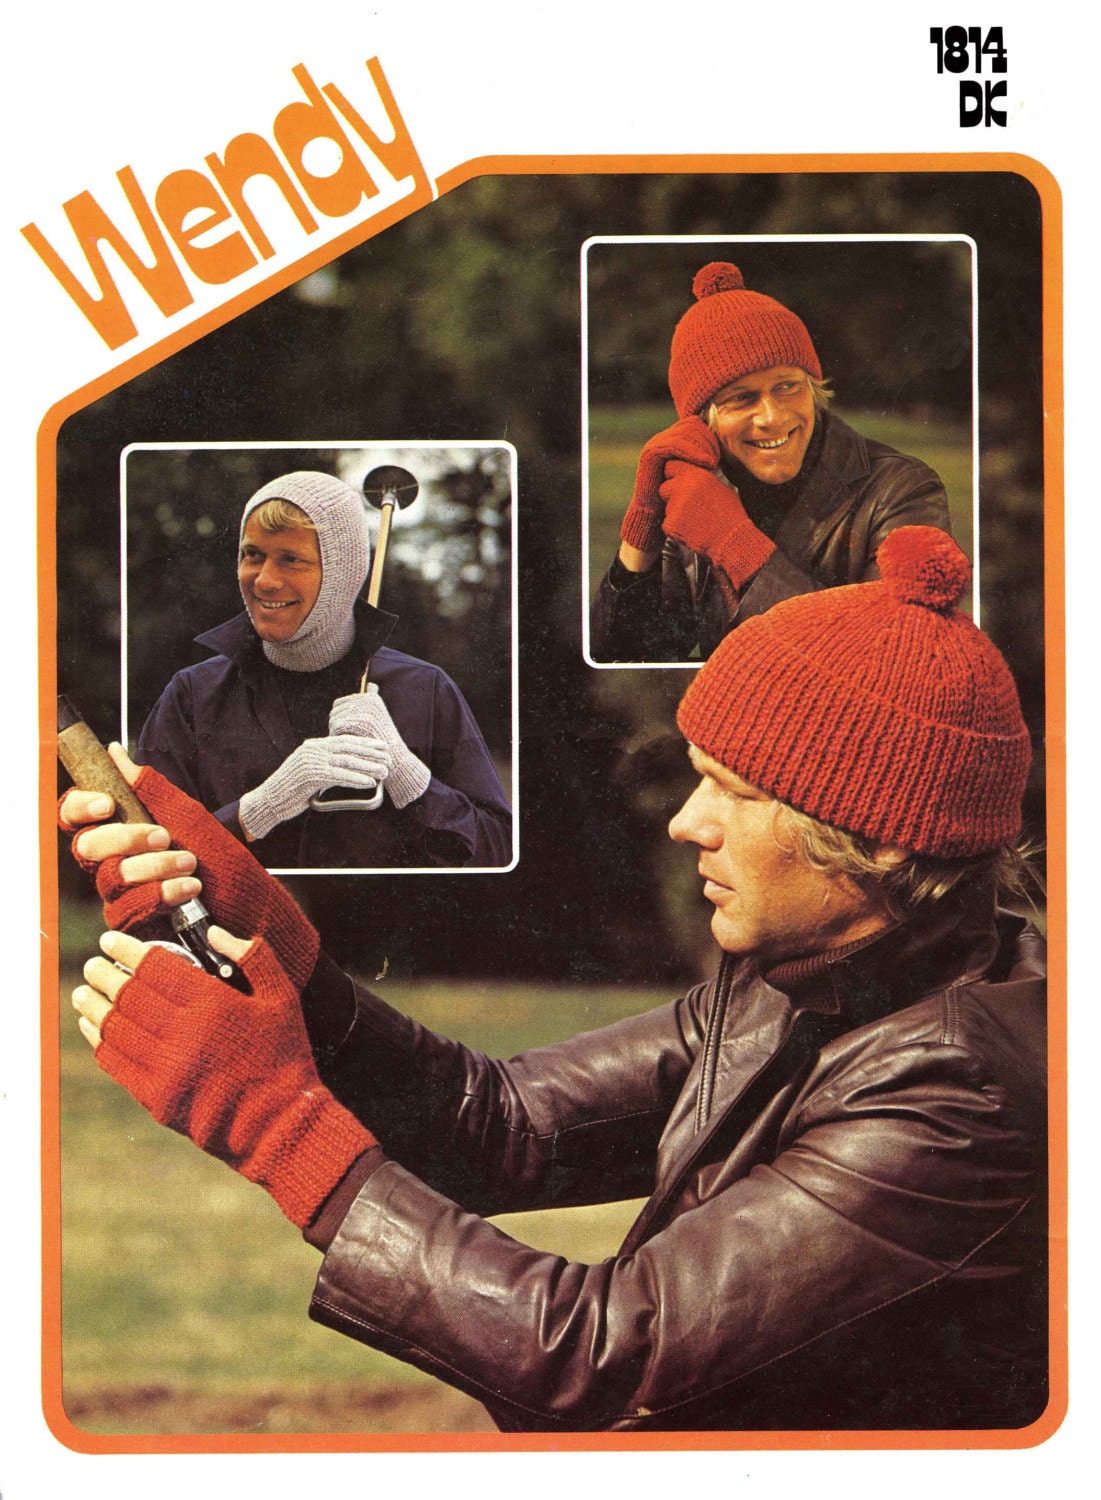 Men's Balaclava Ribbed Hat and Gloves, DK, 70s Knitting Pattern, Wendy 1814